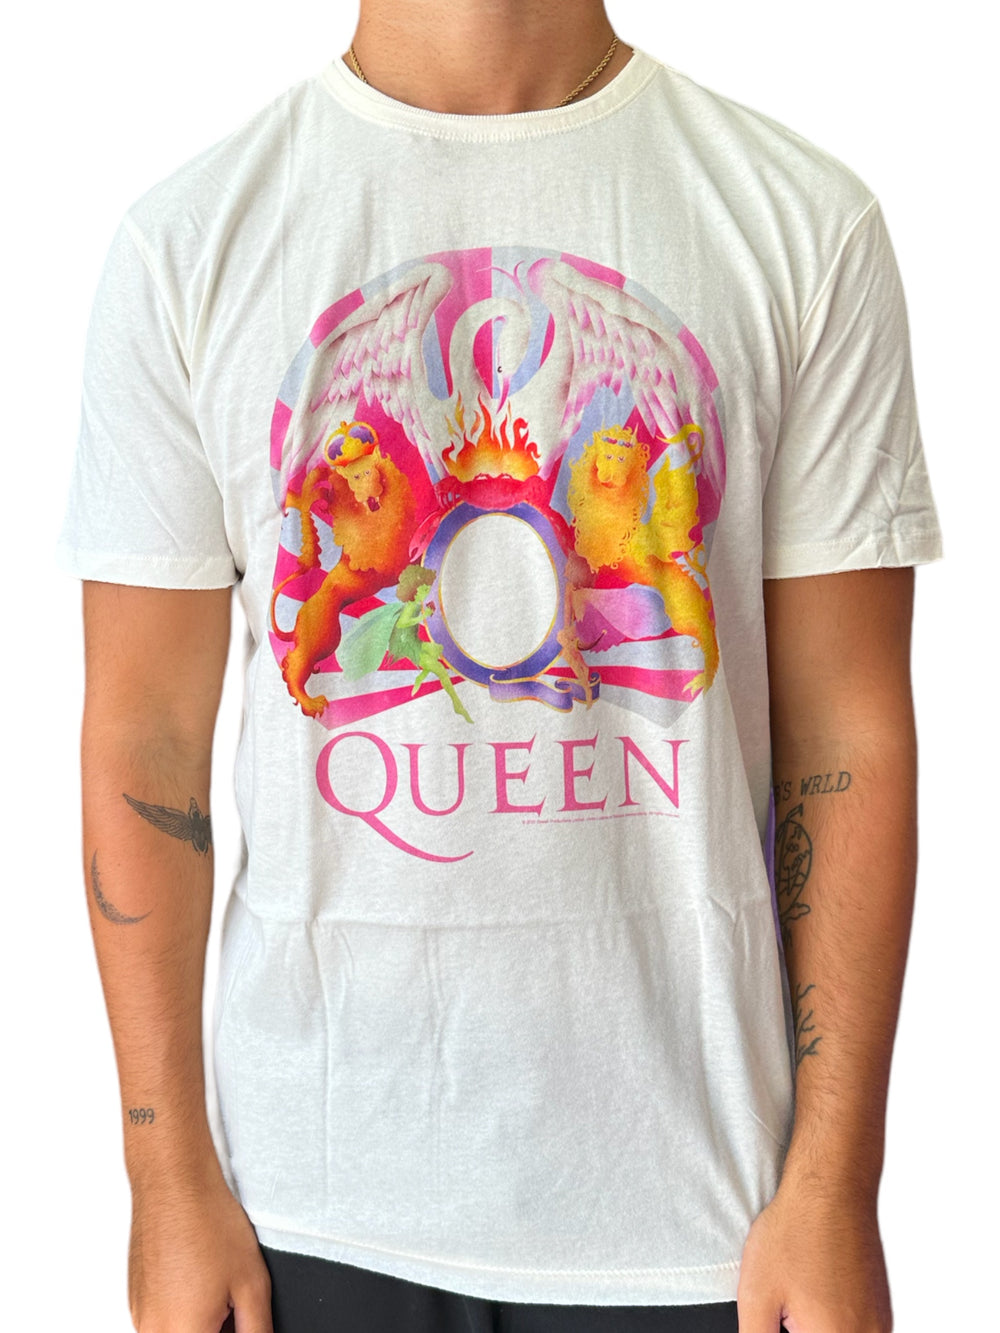 Queen - Freddie A Night At The Opera  Amplified Vintage White T Shirt Various Sizes NEW